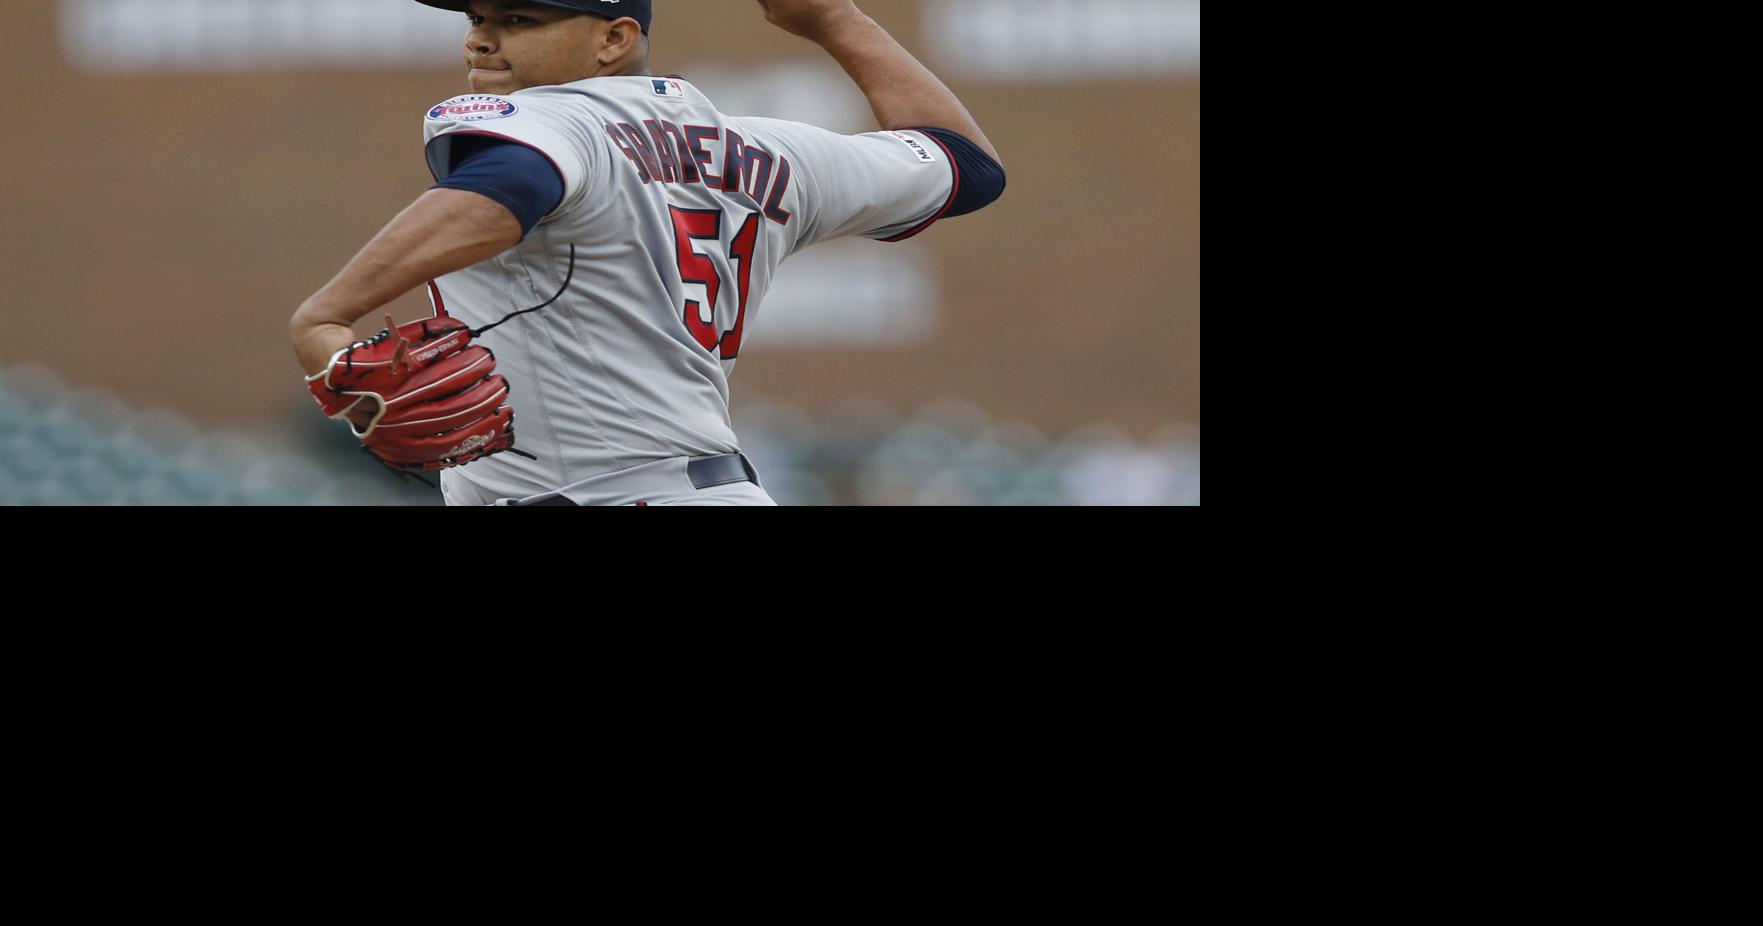 Brusdar Graterol's Velocity in Context - Sethmoko's Blog - Twins Daily